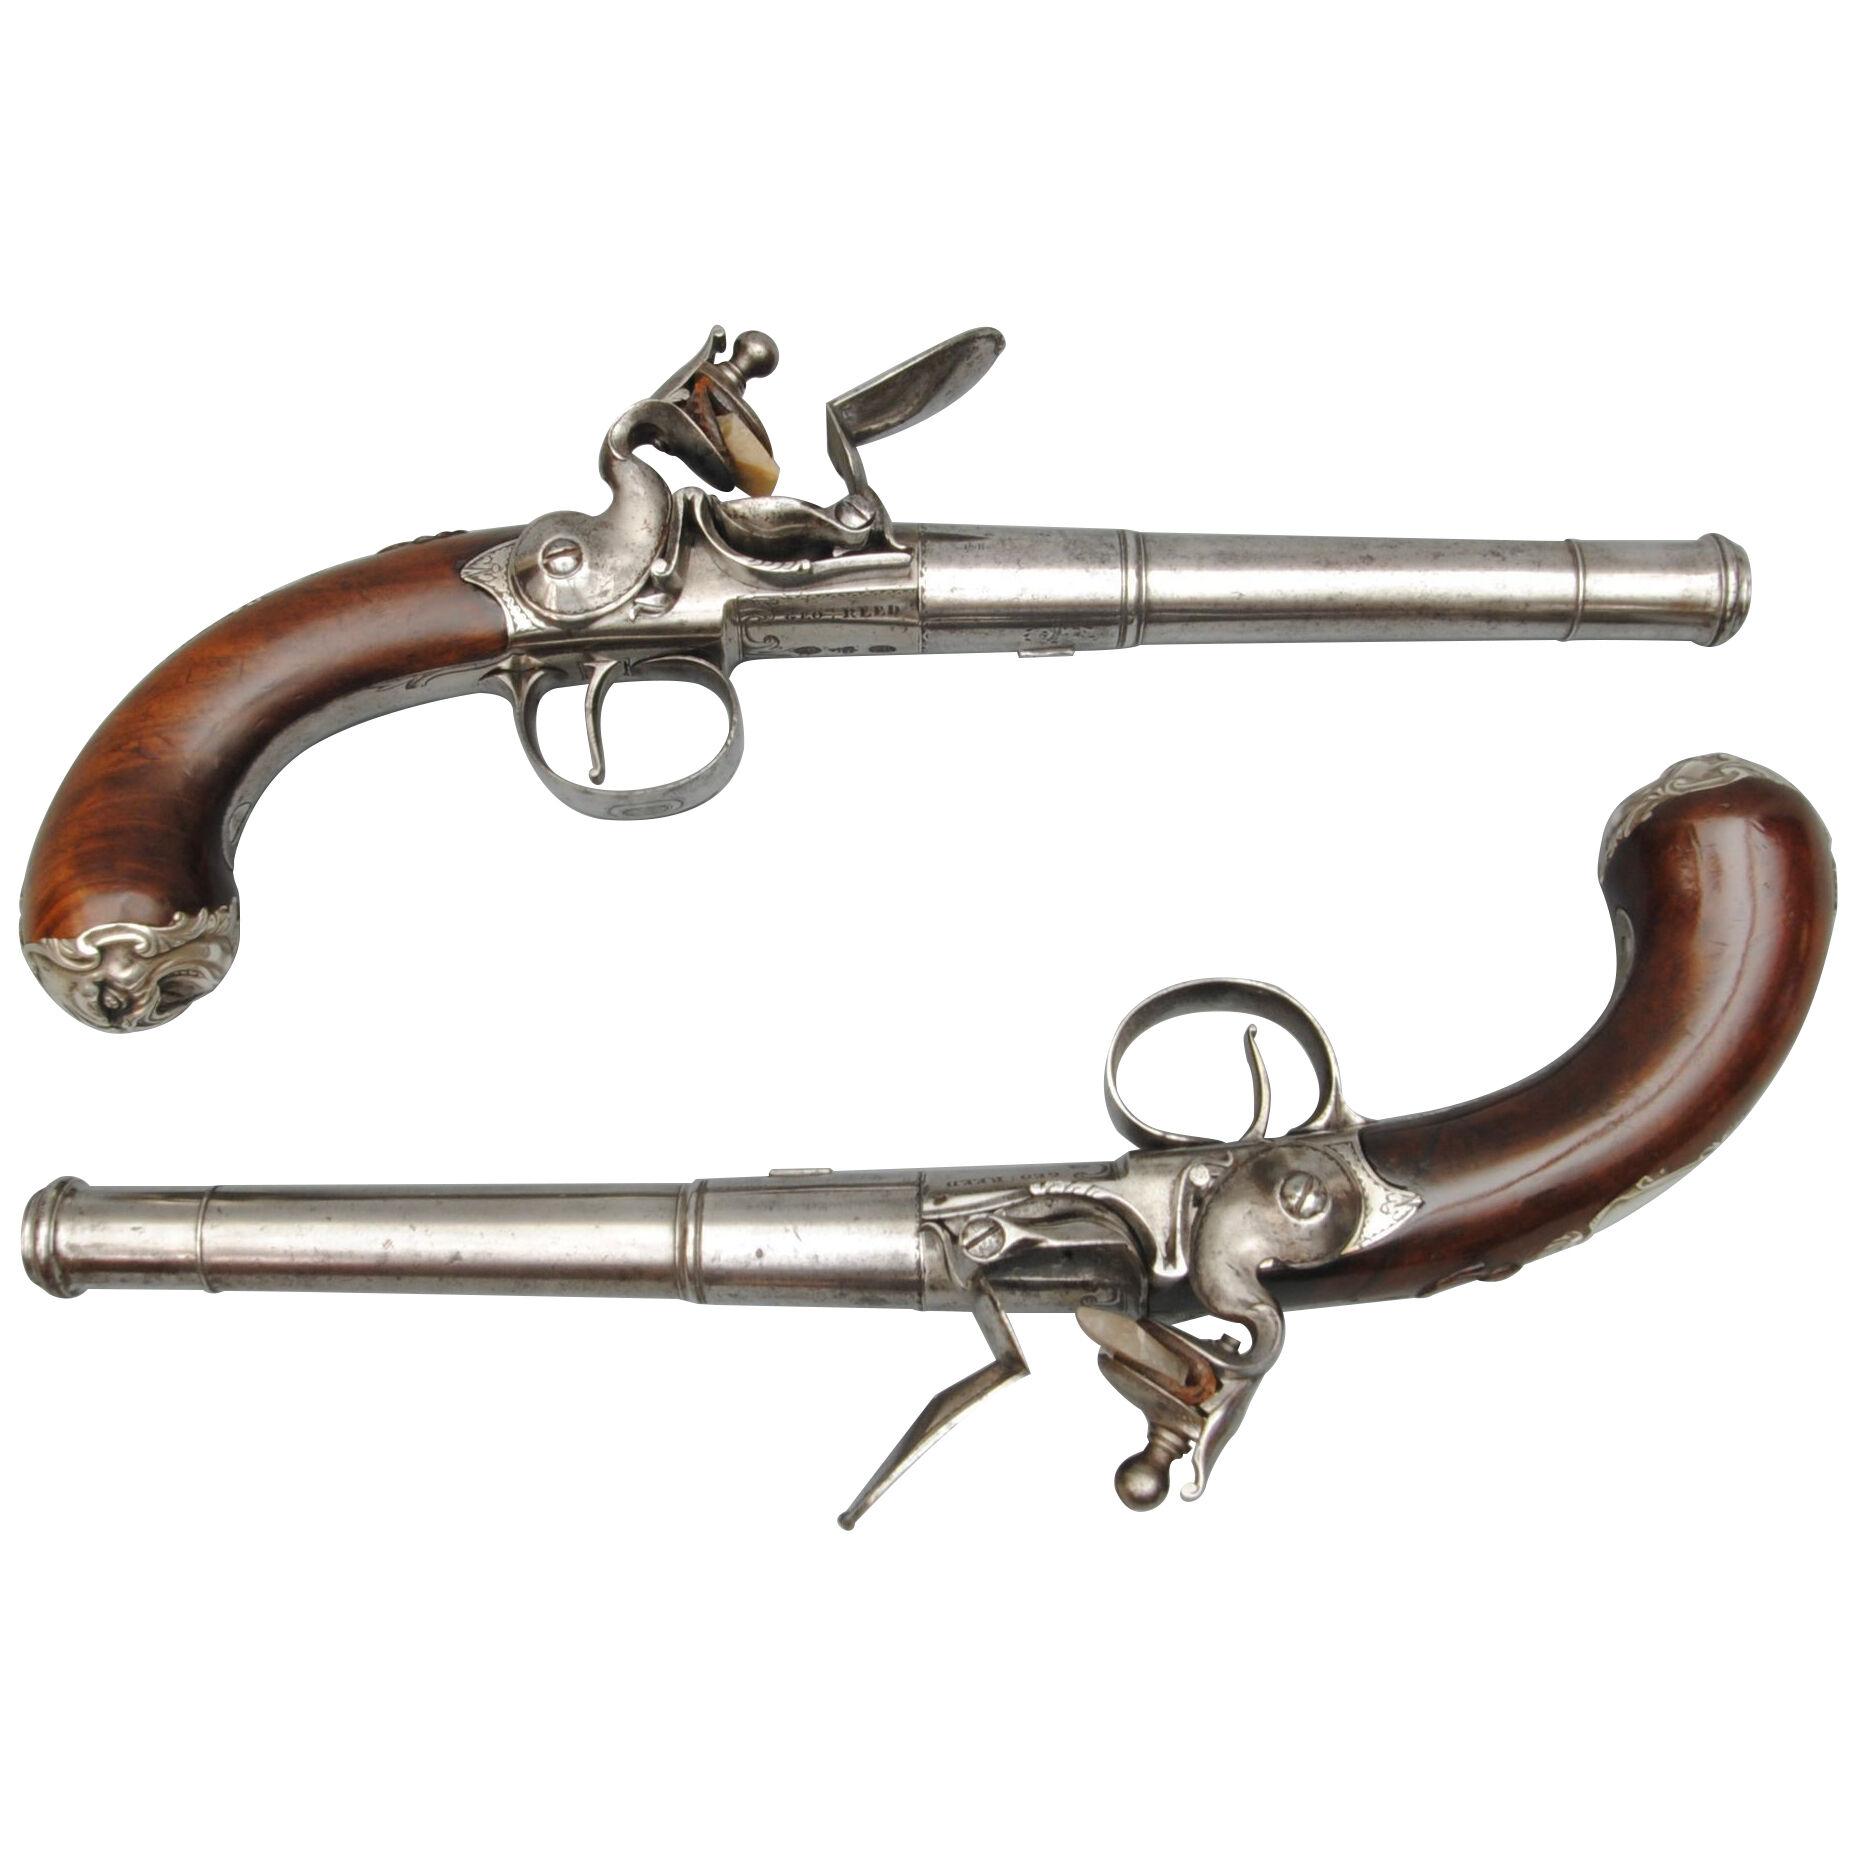 A RARE PAIR OF SILVER MOUNTED QUEEN ANNE PISTOLS